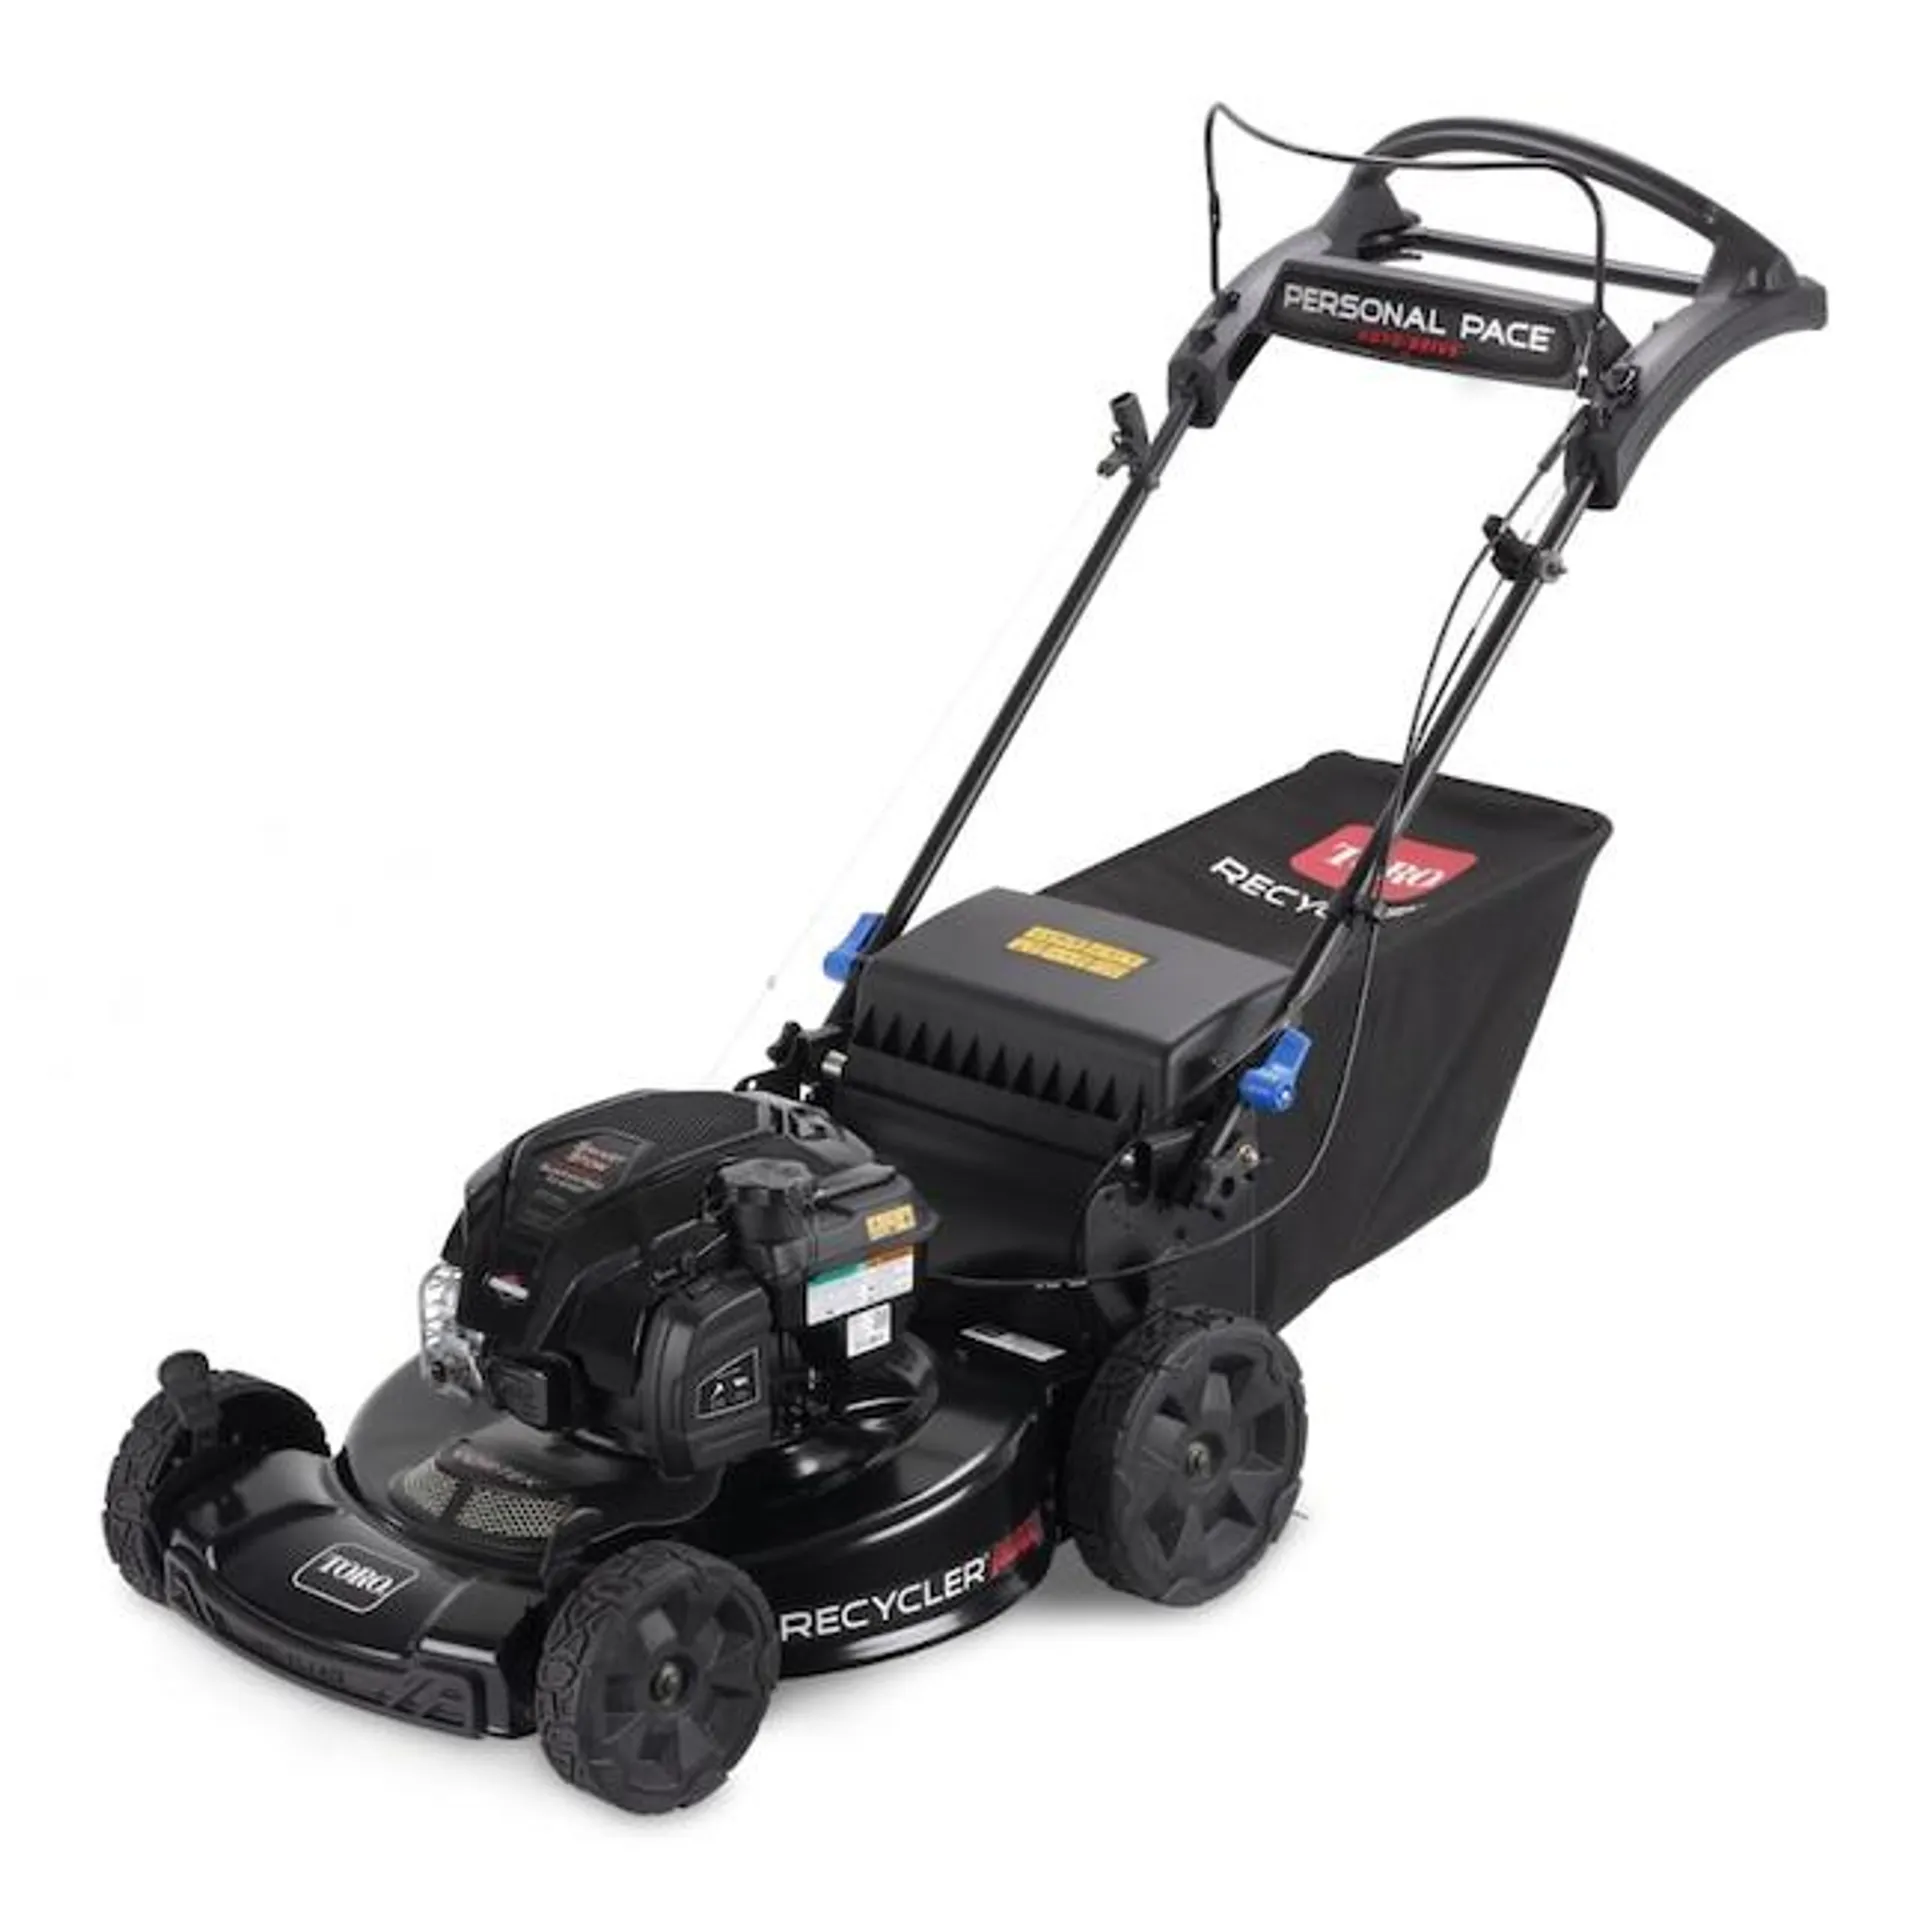 Toro Recycler Max 22-in Gas Self-propelled Lawn Mower with 163-cc Briggs and Stratton Engine